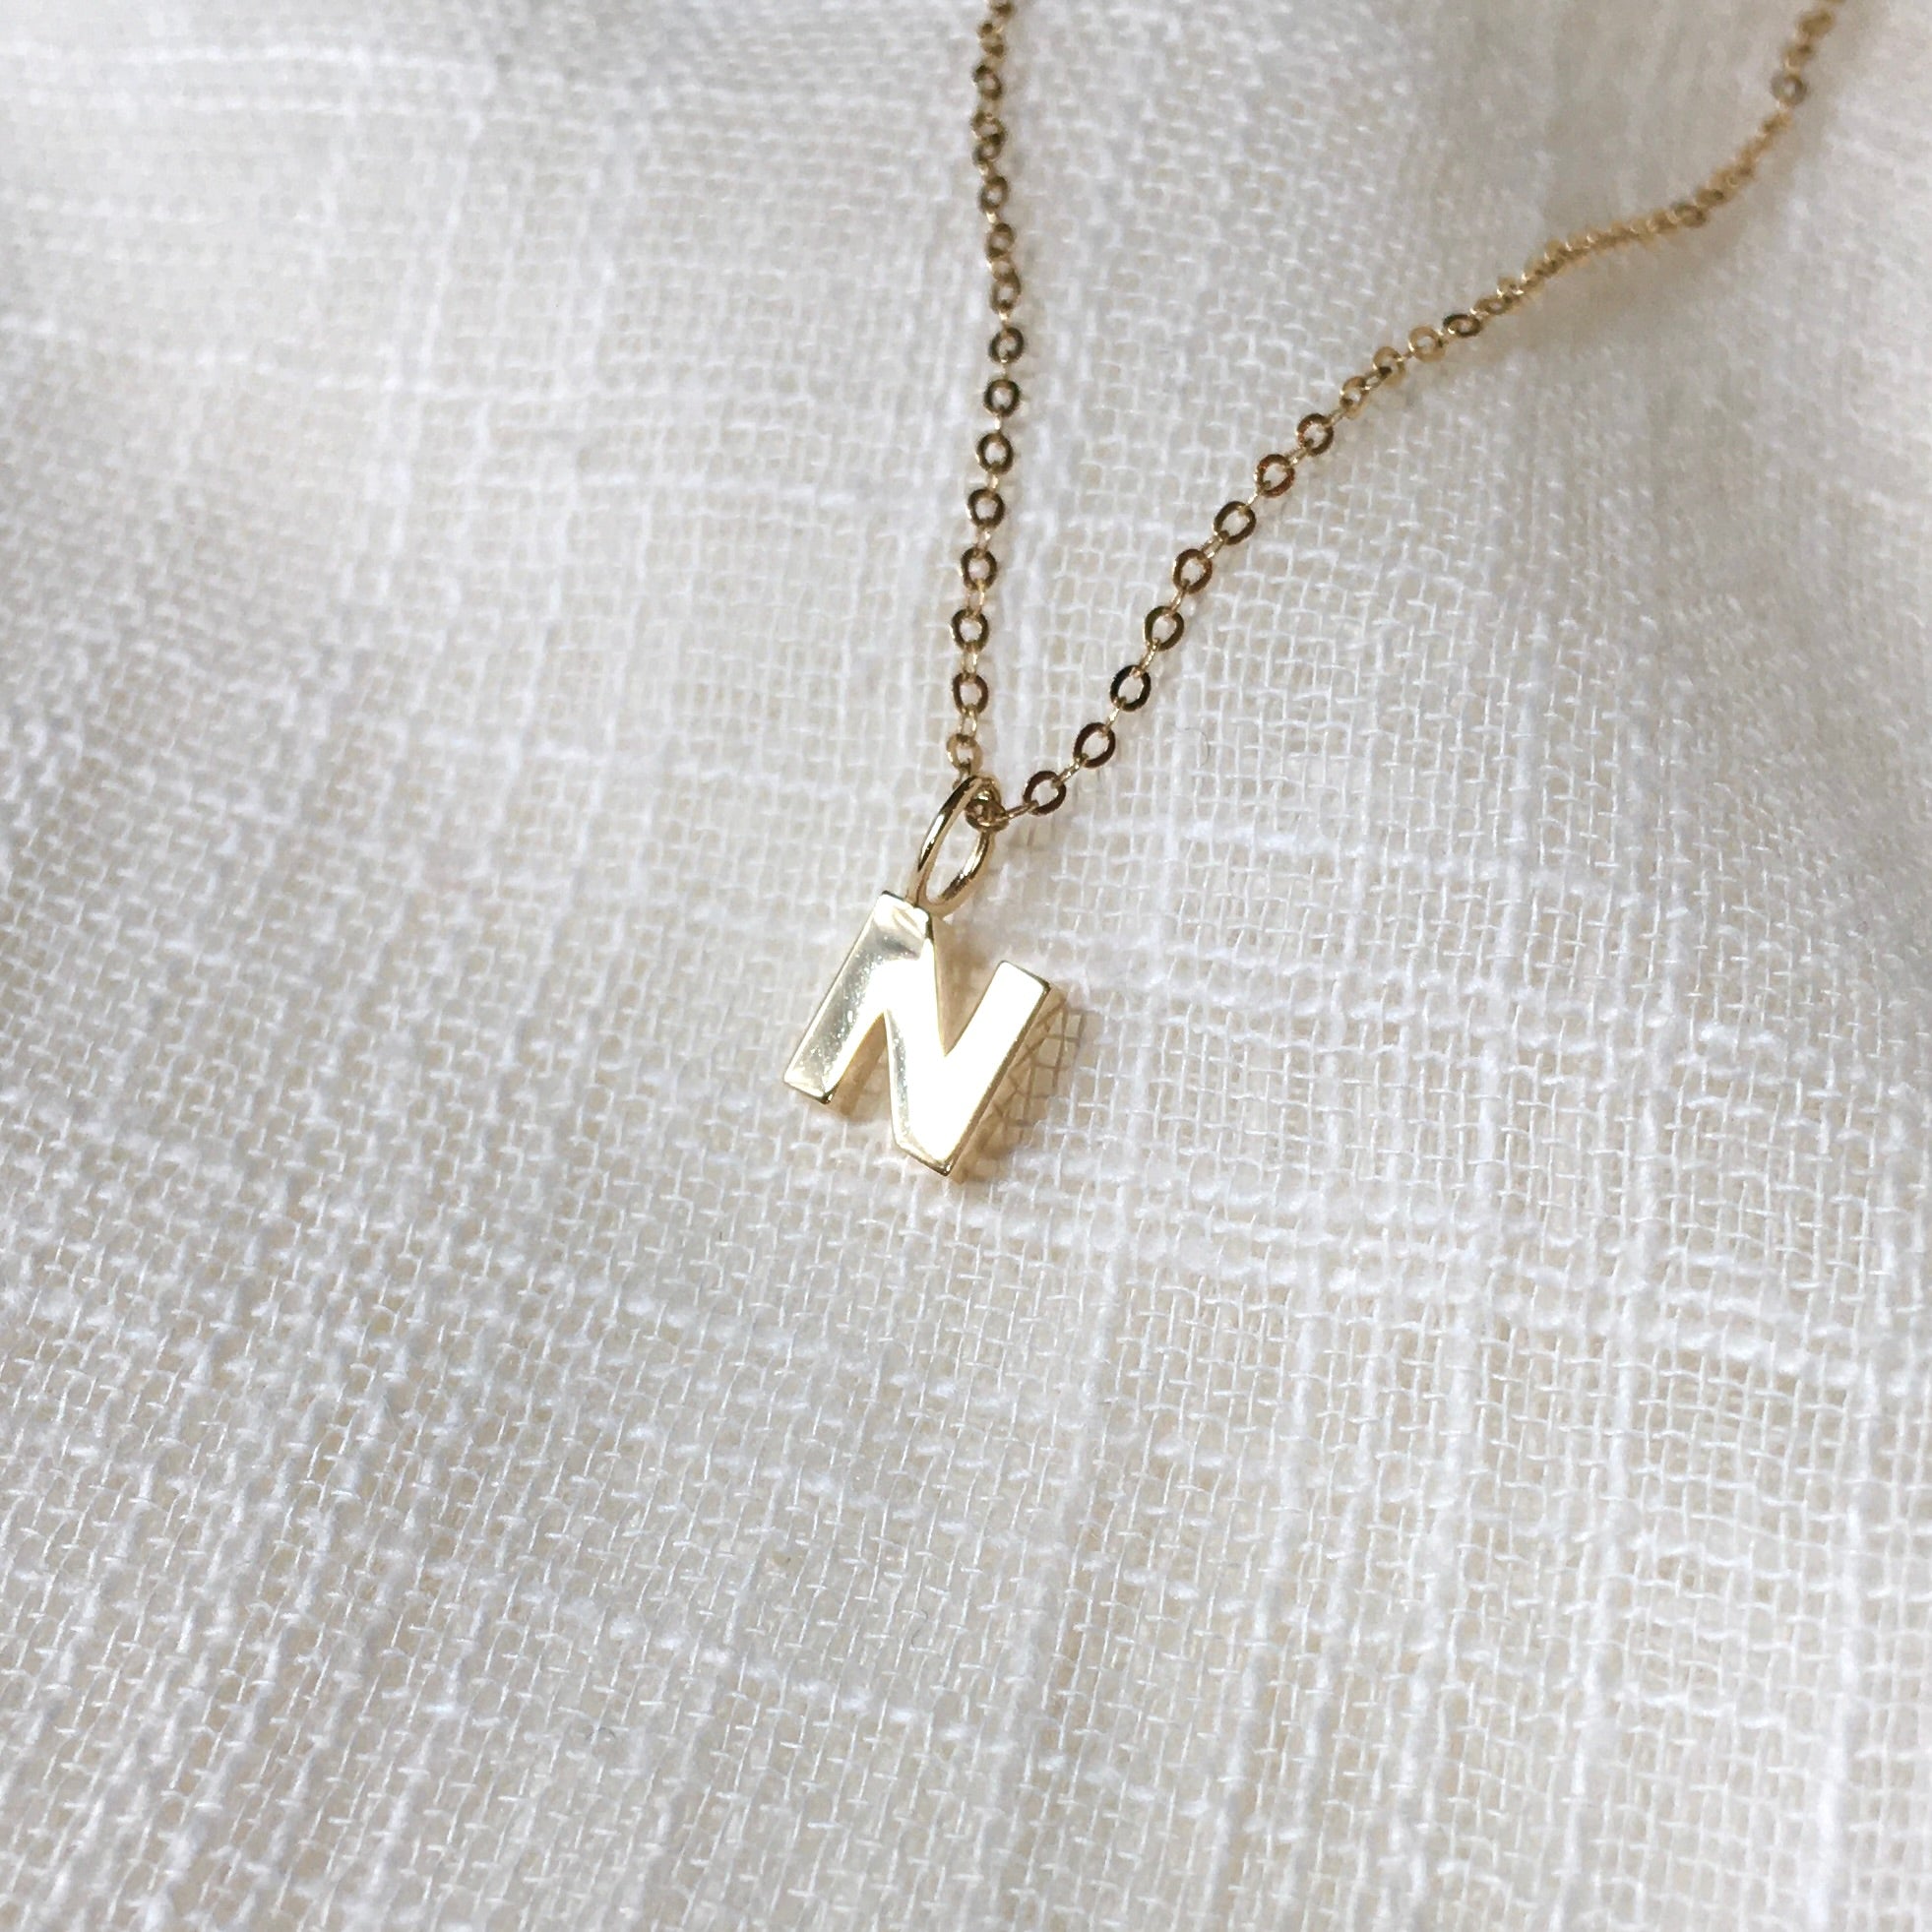 14K GOLD N INITIAL NECKLACE